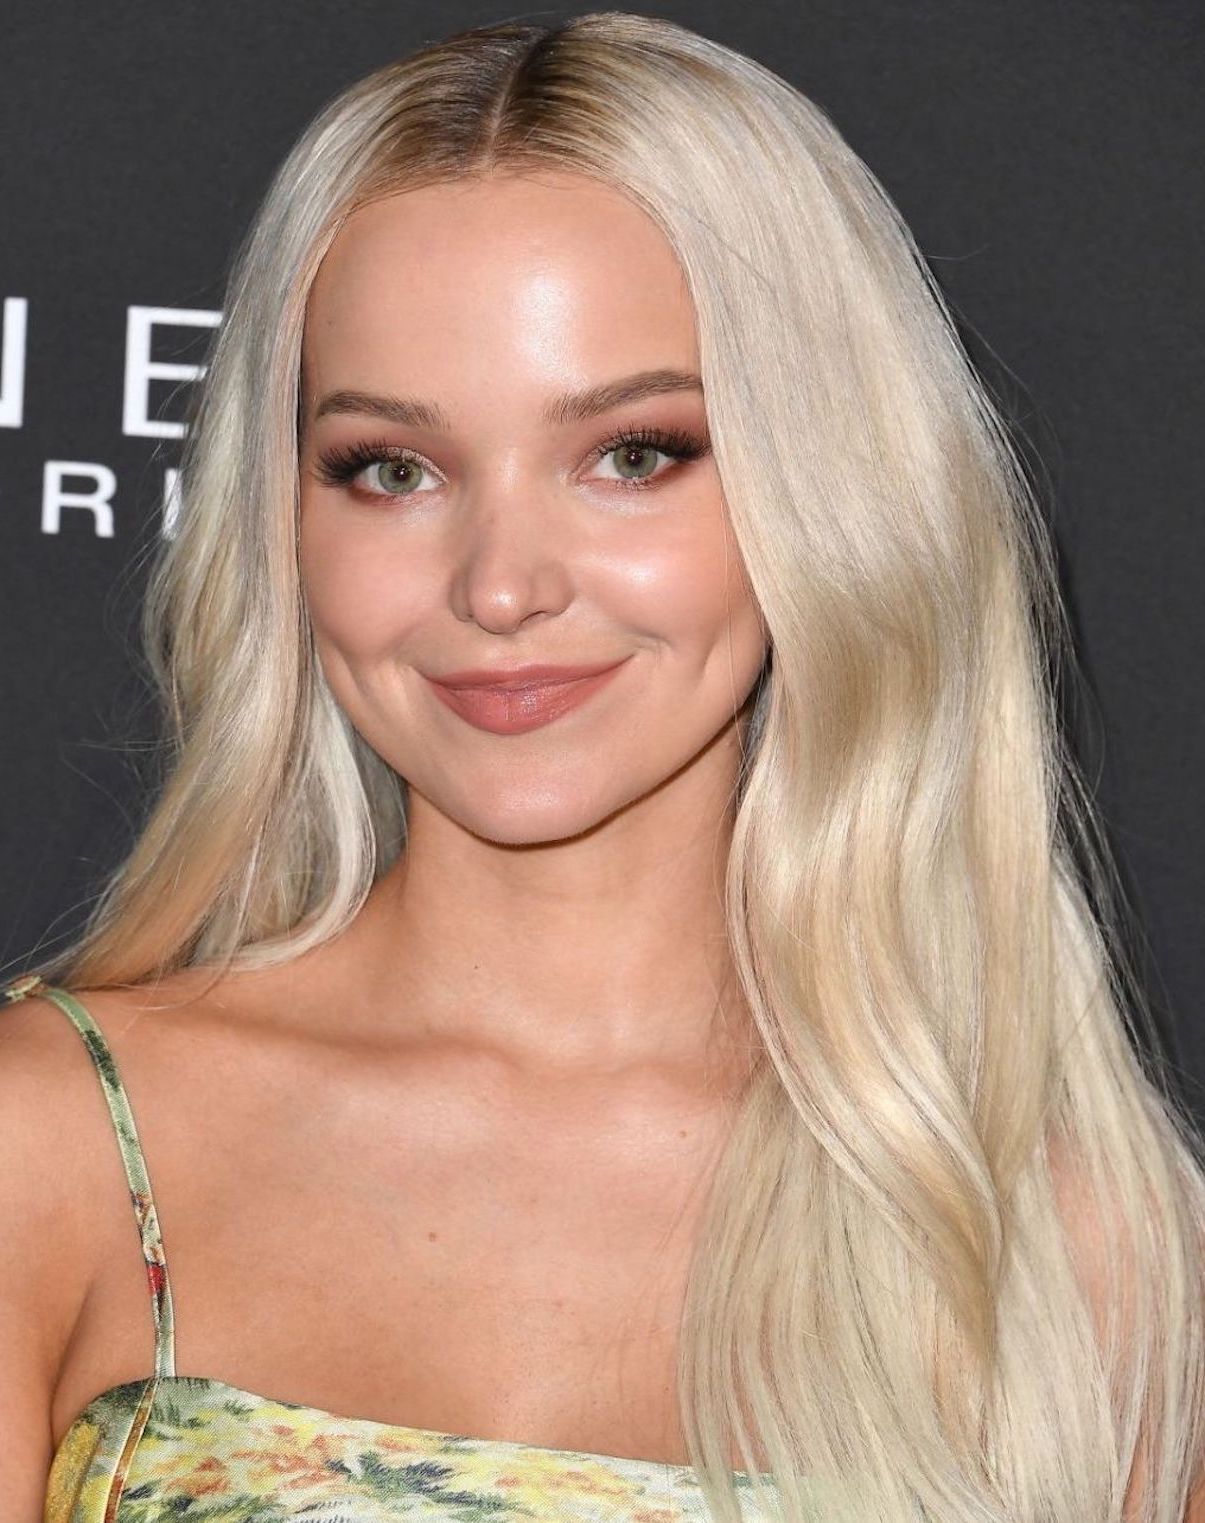 Dove Cameron Wants To Star In Disney's Live-Action Rapunzel Movie